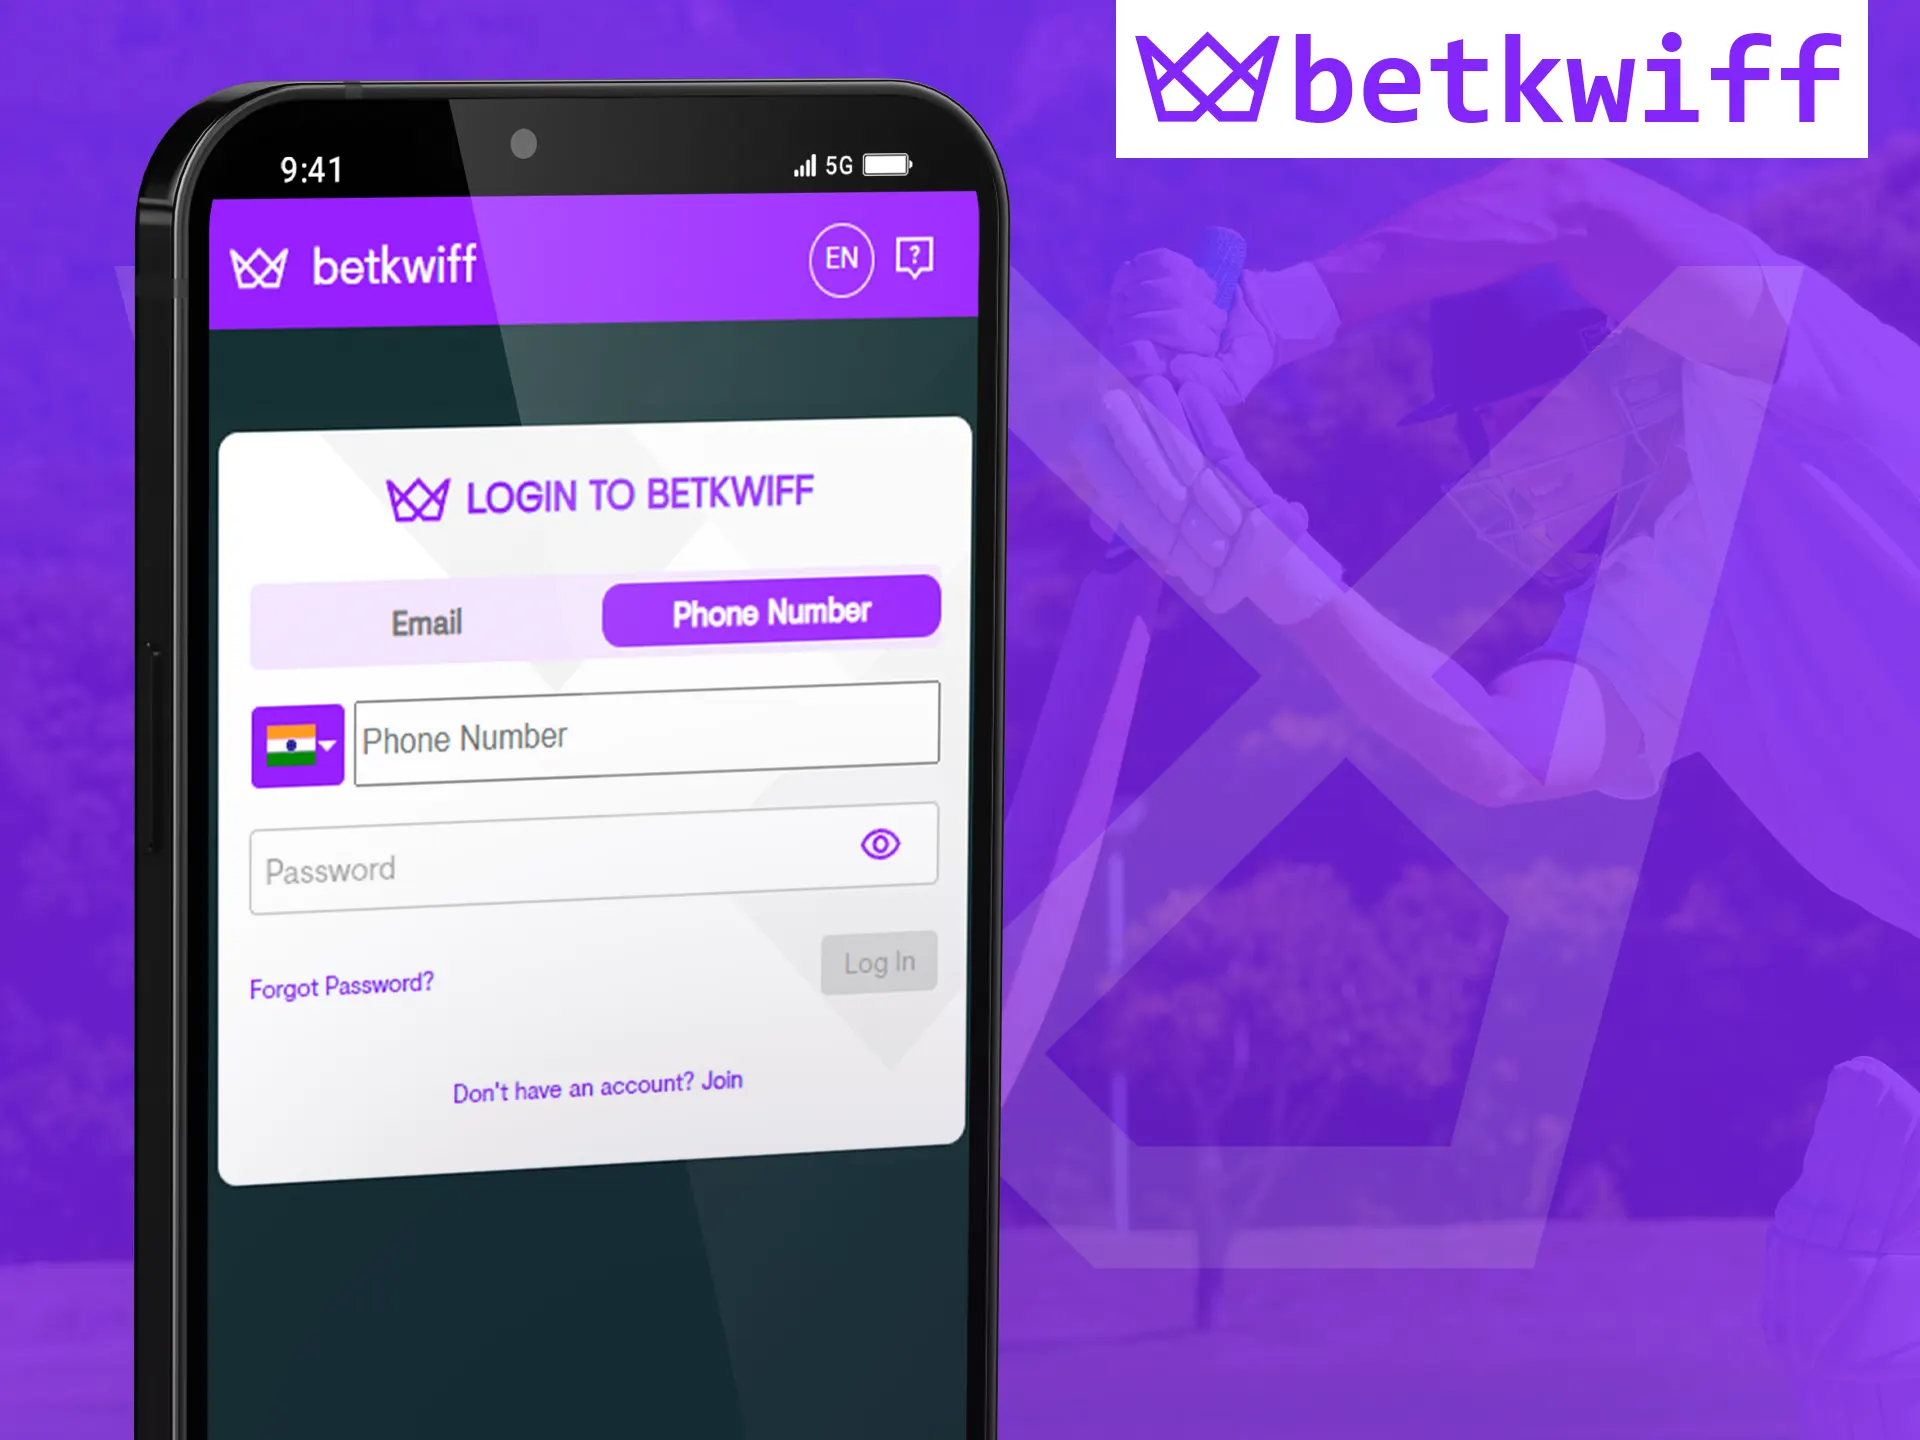 Log in to your Betkwiff app account.